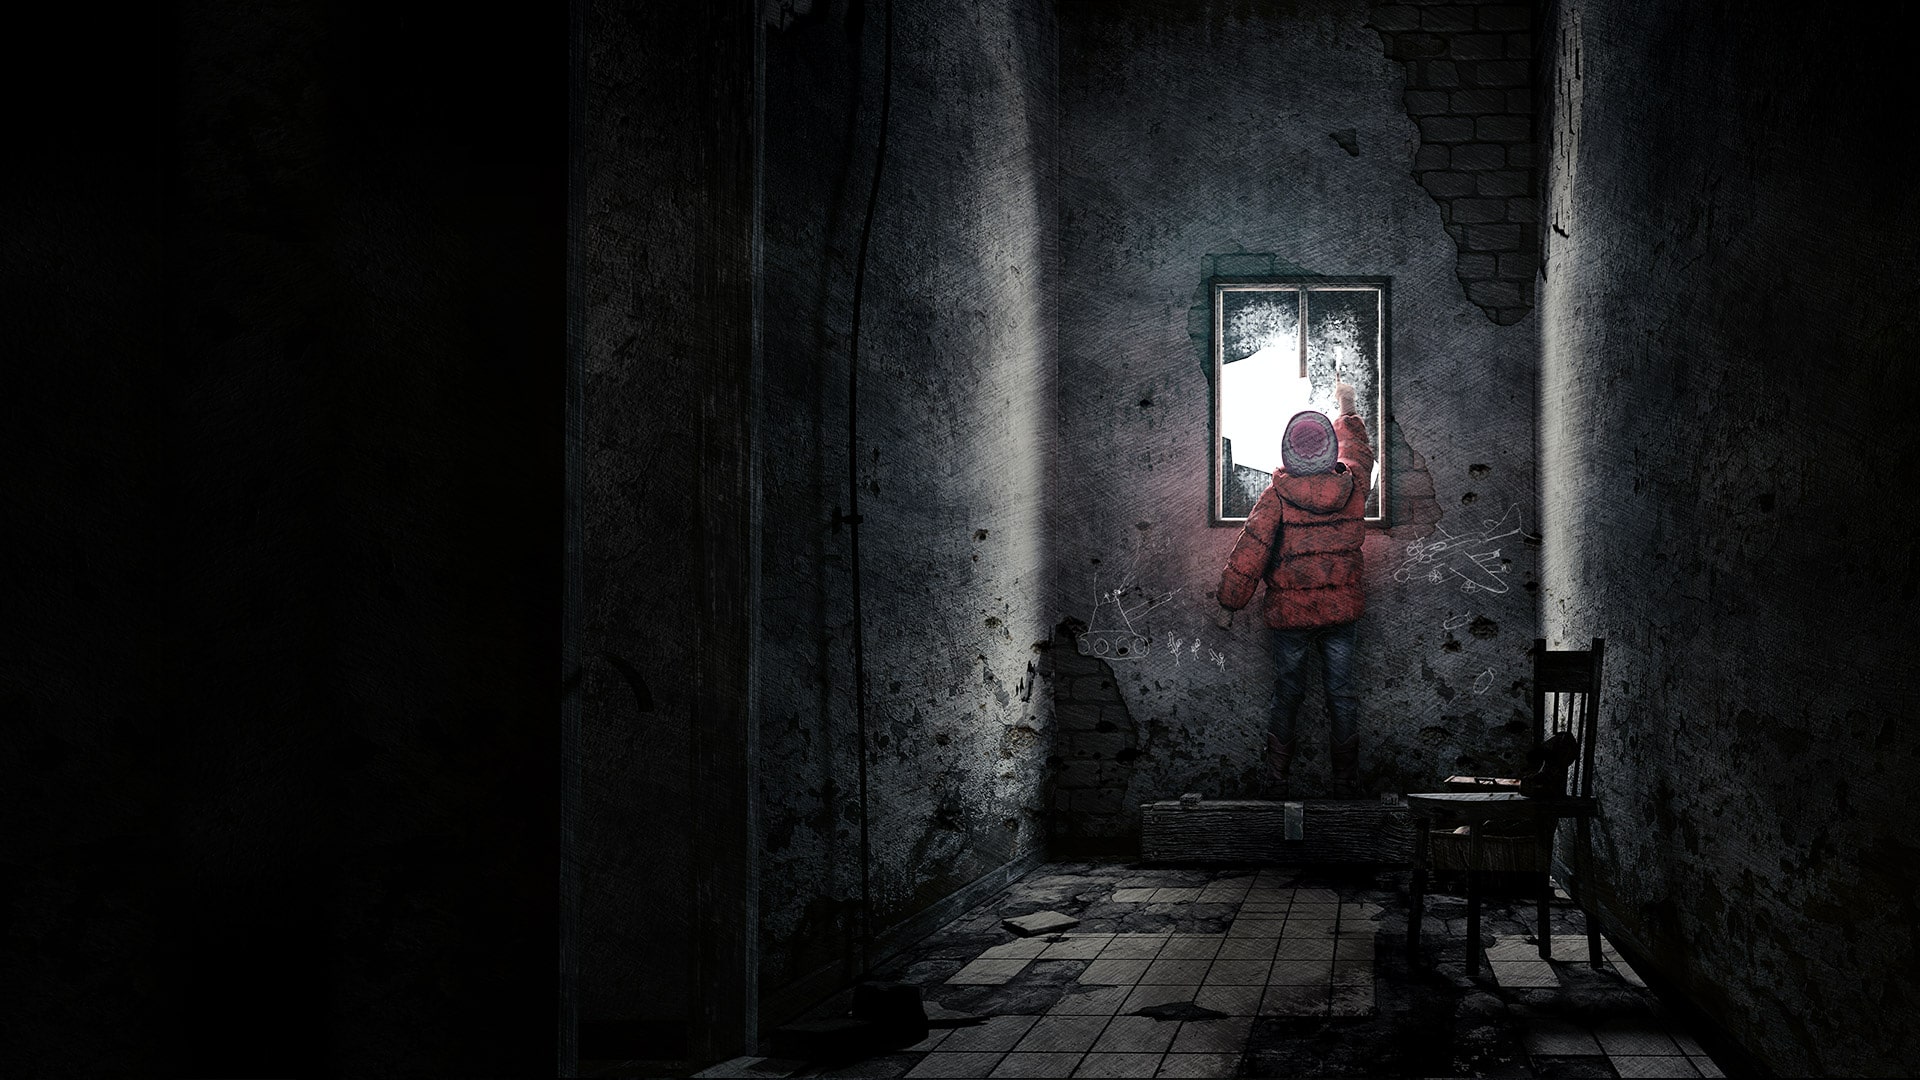 This War of Mine: The Little Ones (英语)